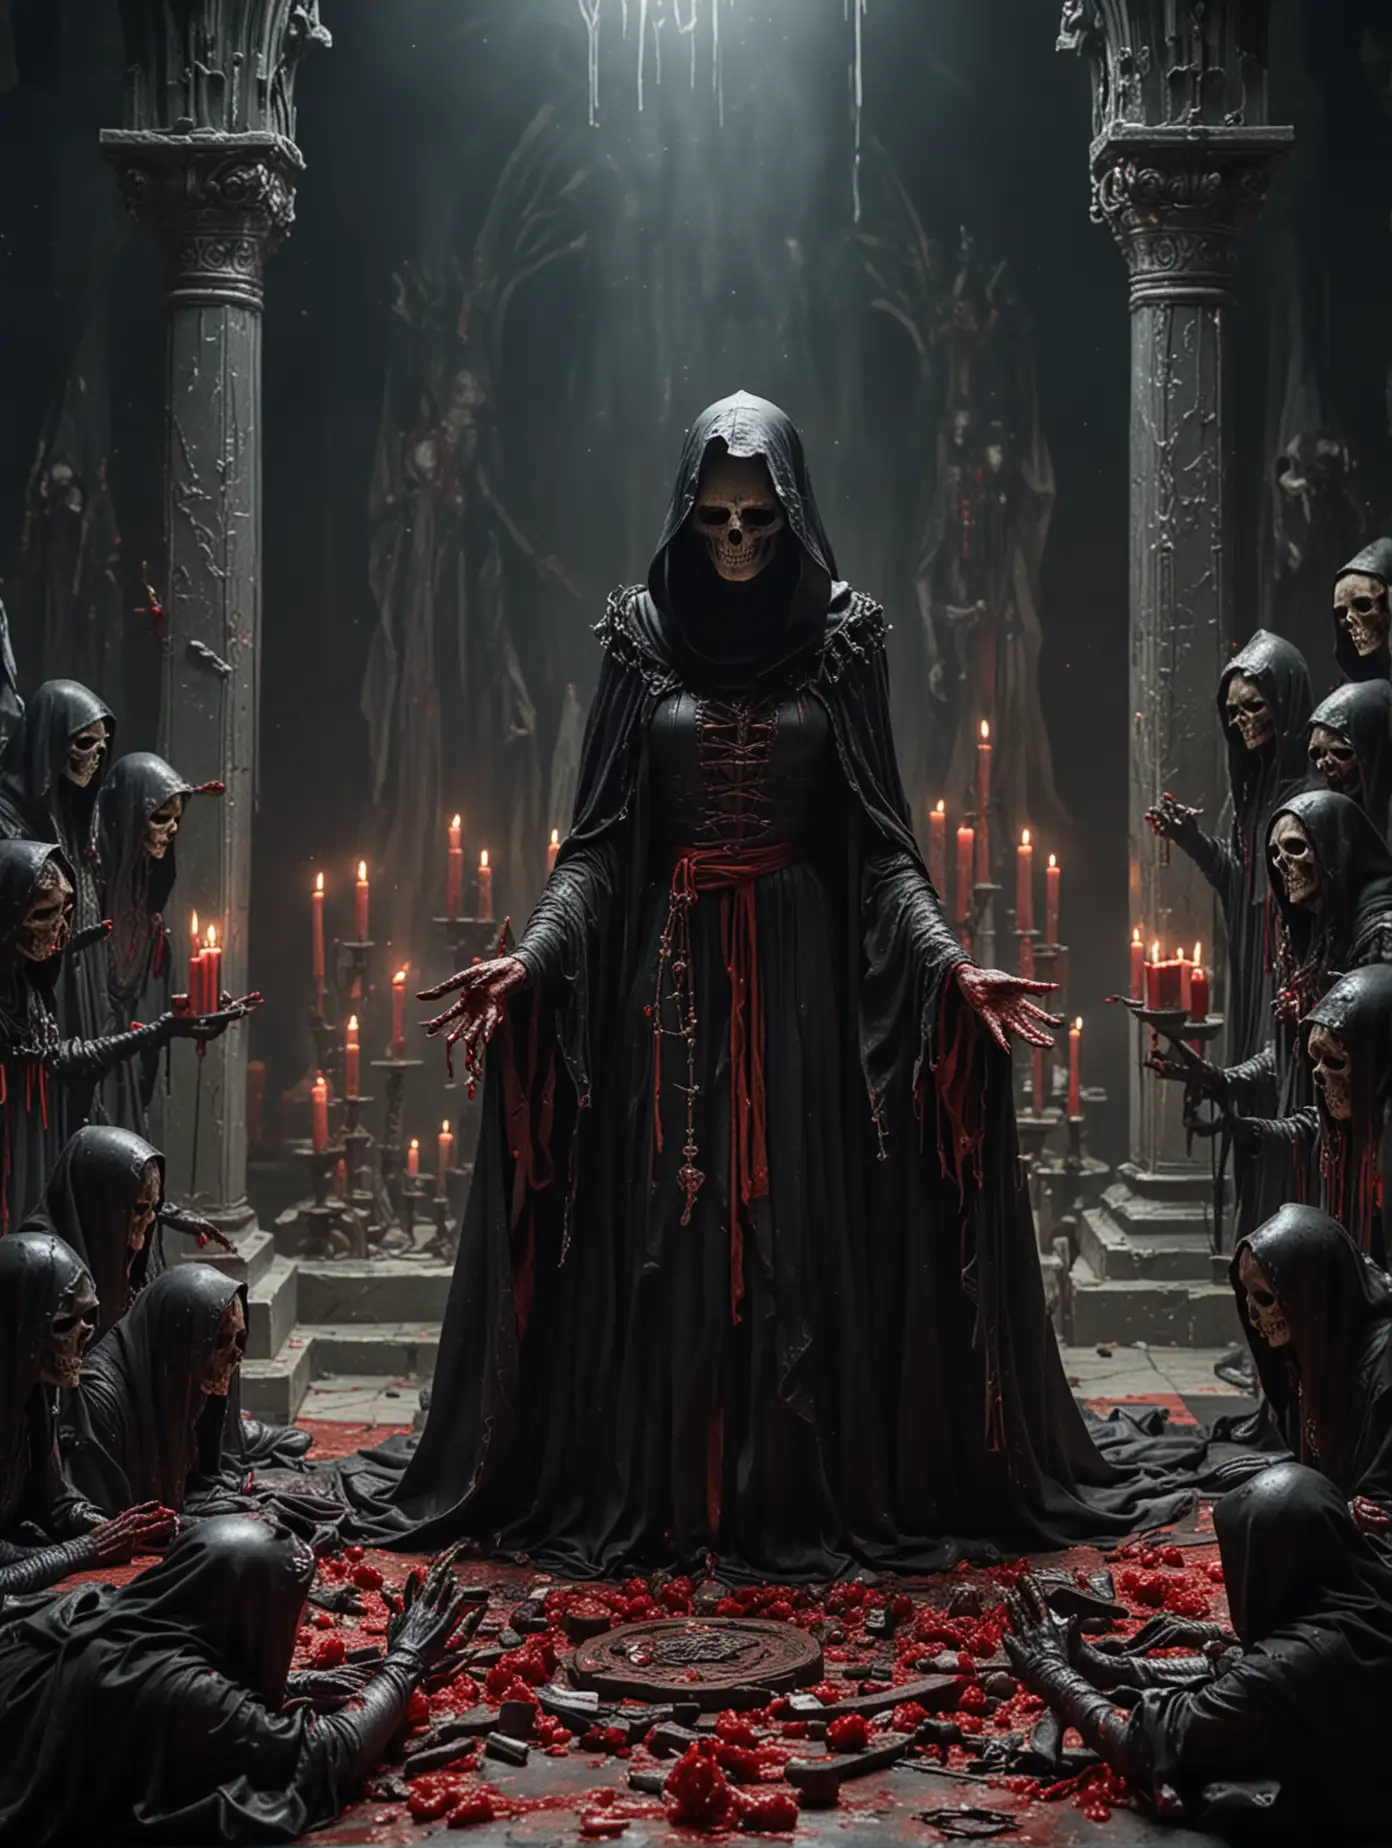 Dark Ritual Queen Lich and Acolytes in Blood Ritual